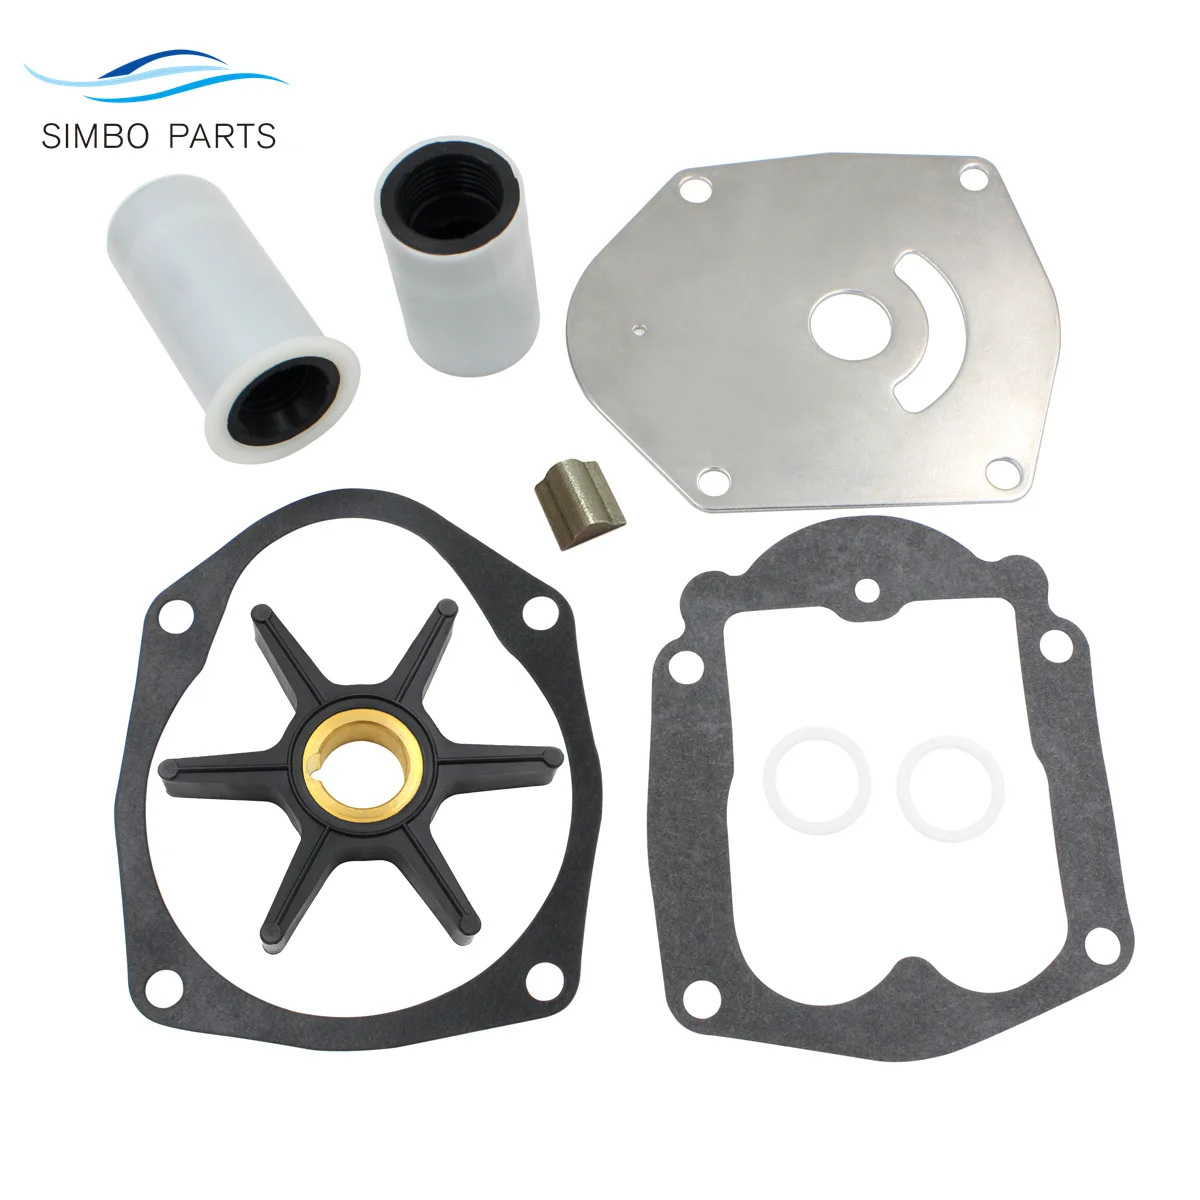 

Water Pump Impeller Kit For Mercury Mariner 25 30 40 50 HP 4-Stroke Outboard 47-821354A1 47-821354A2 821354A1 821354A2 18-4531